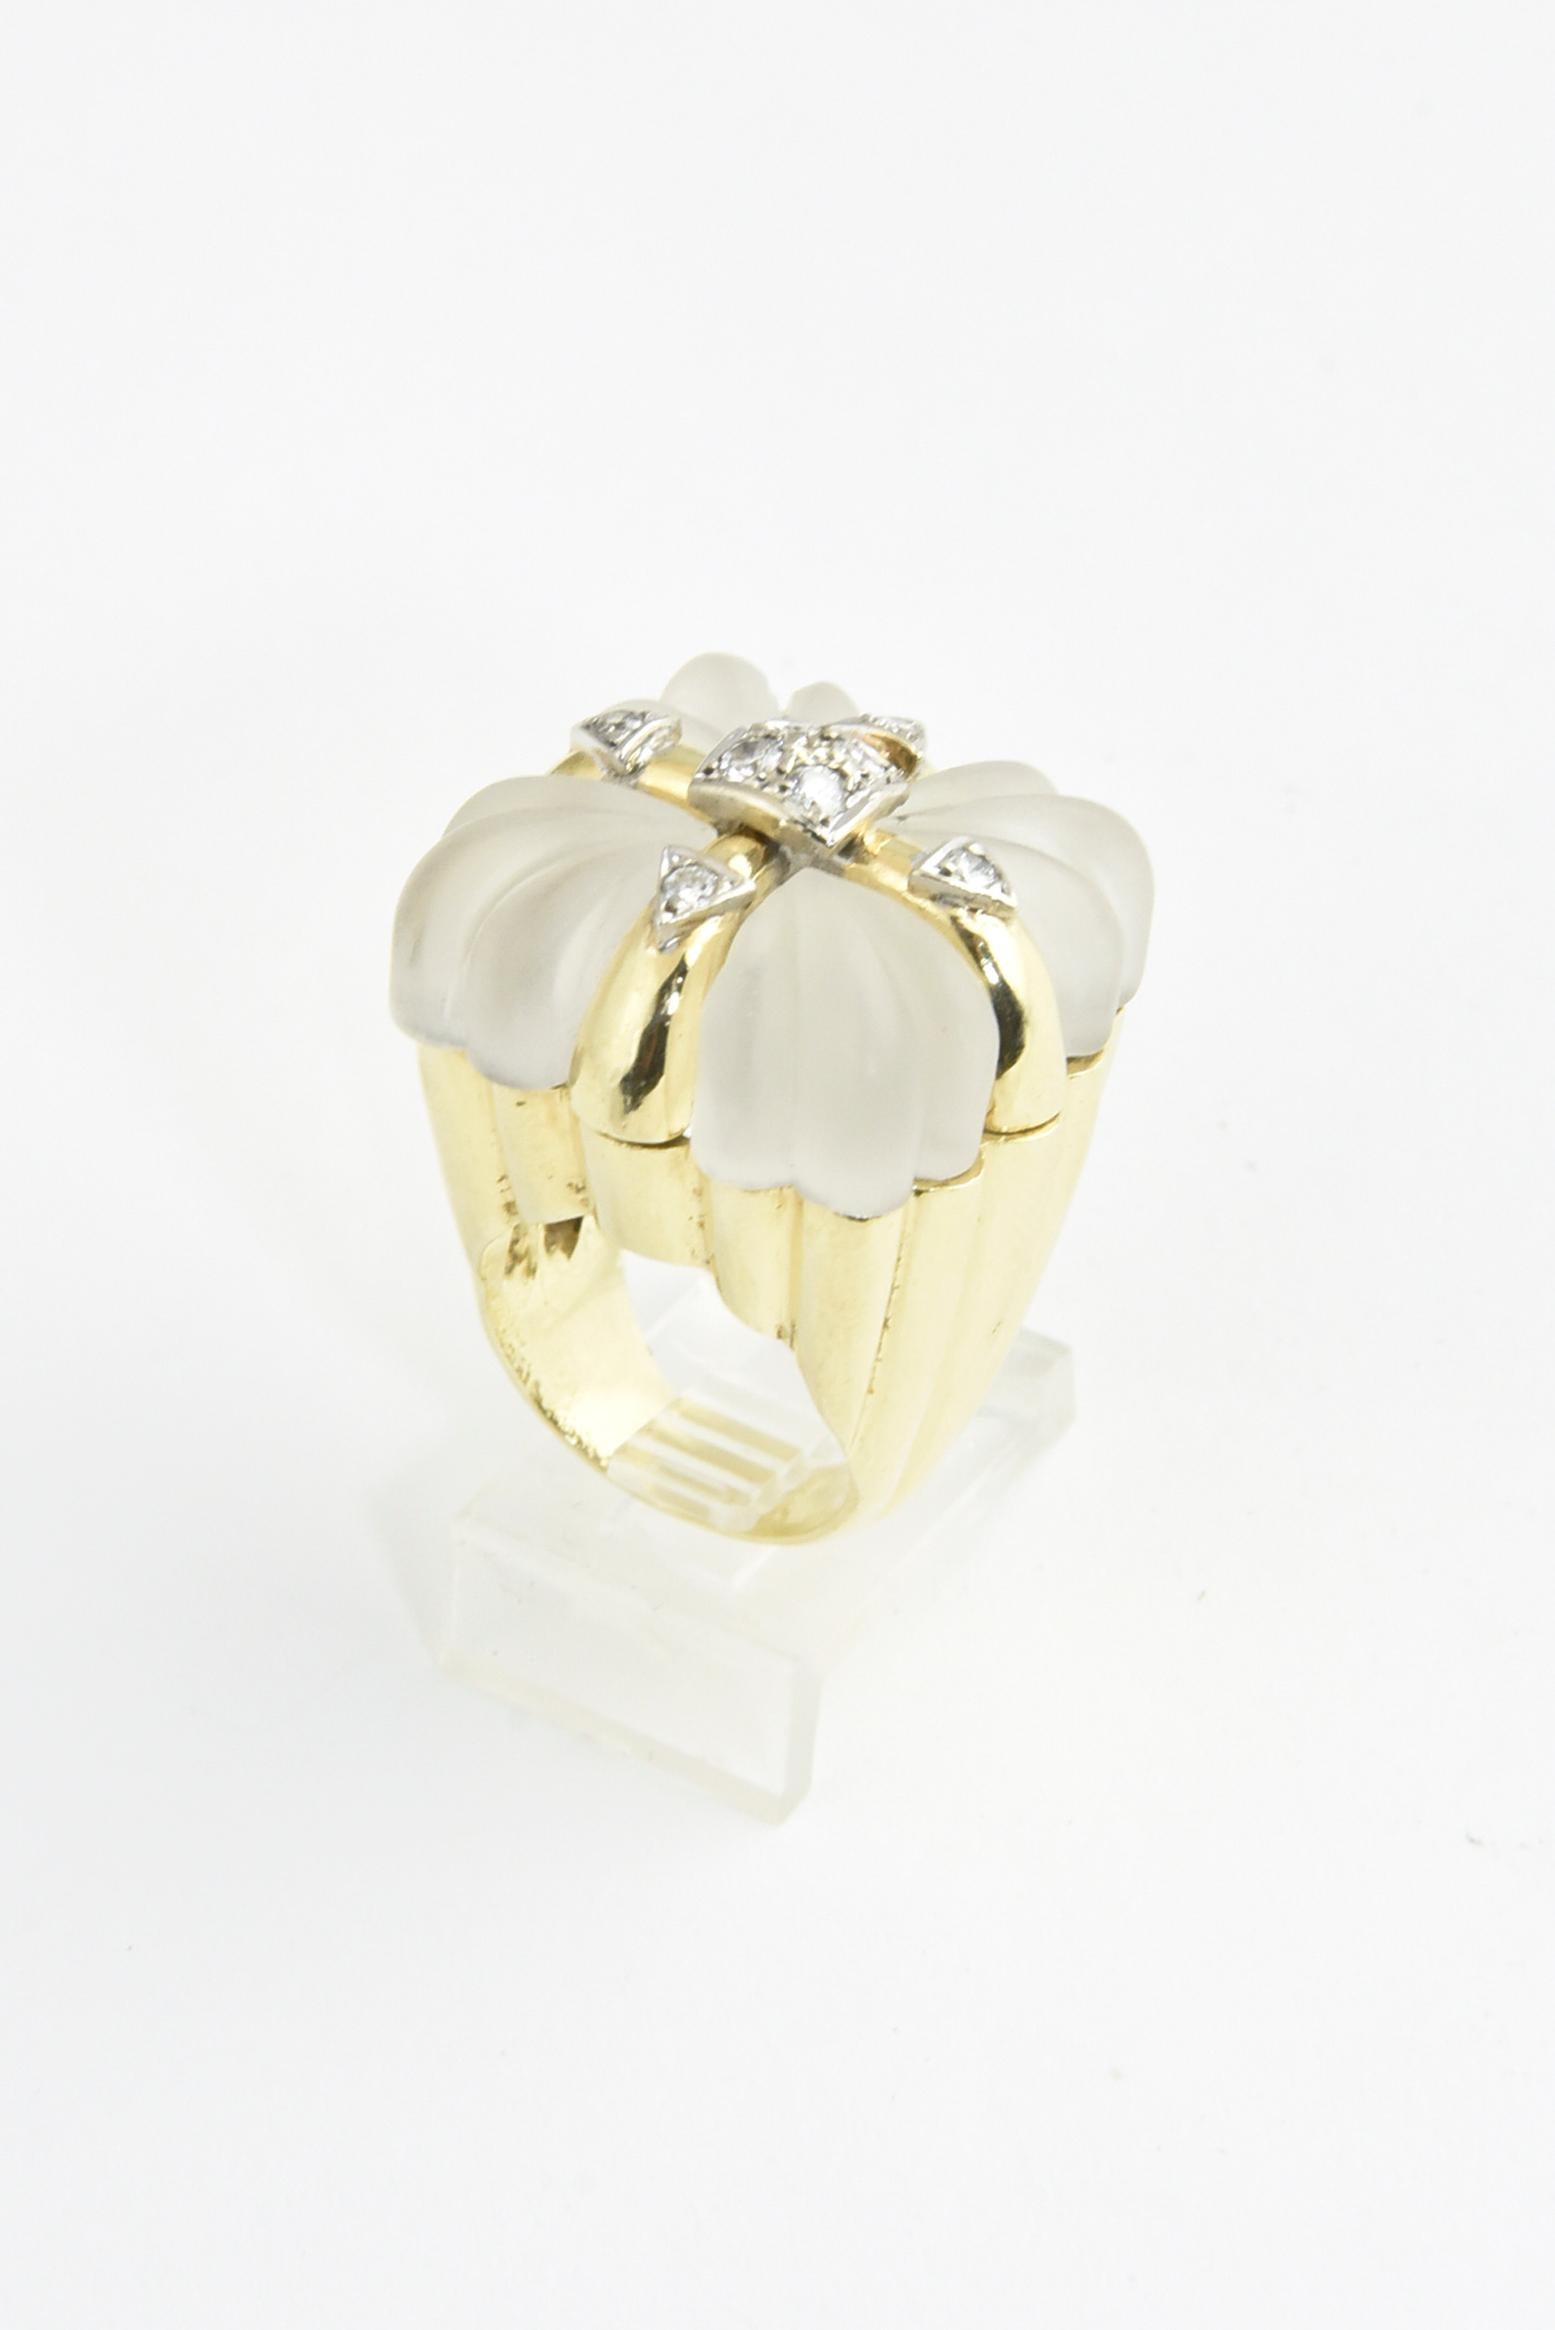 1970s Carved rock crystal cocktail ring designed to look like a present.  The gold ribbon across the top is accented with 8 diamonds with an approximate total weight of .60 carats.  The ring is 18k yellow gold.  The rock crystal as well as the gold